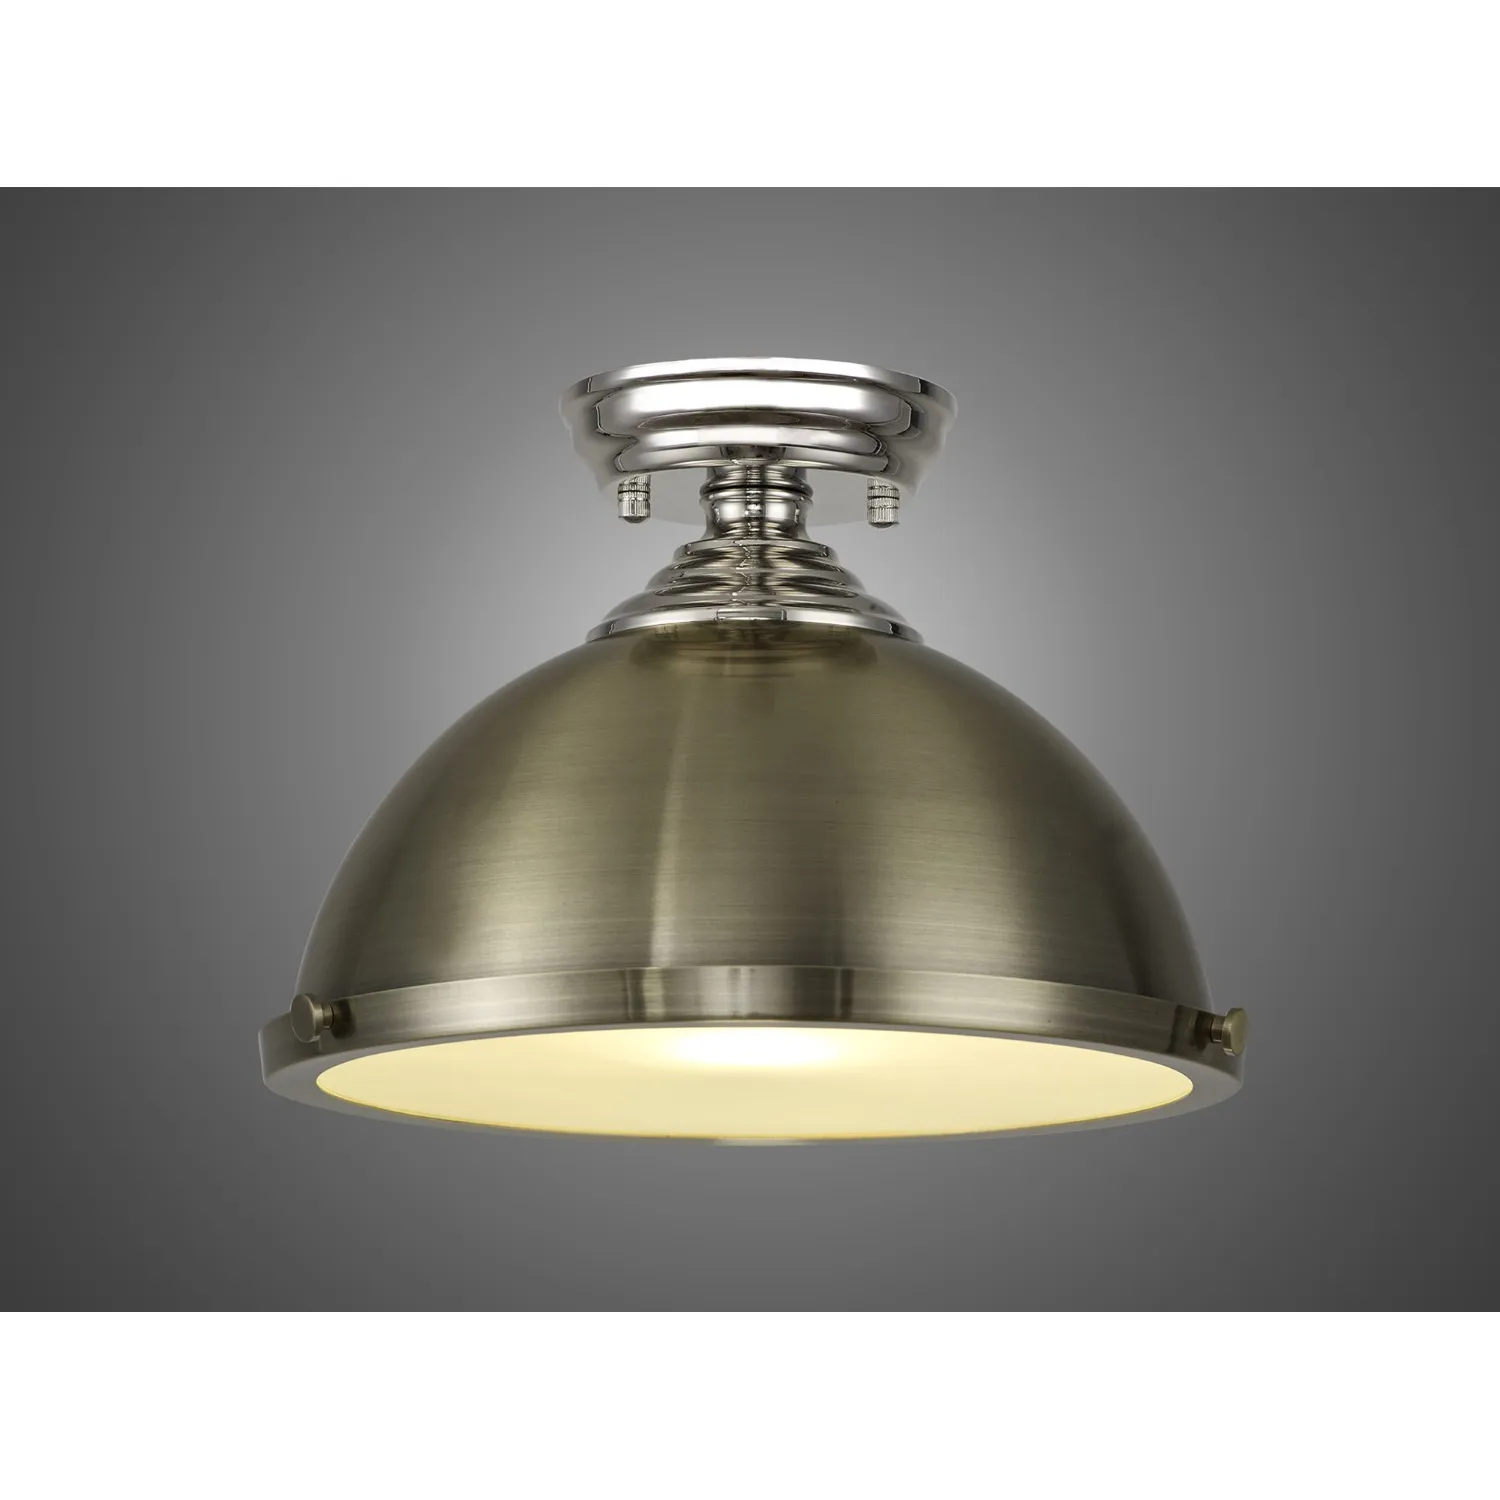 Billericay 1 Light Flush Ceiling E27 With Round 31cm Metal Shade Polished Nickel Antique Brass Frosted White